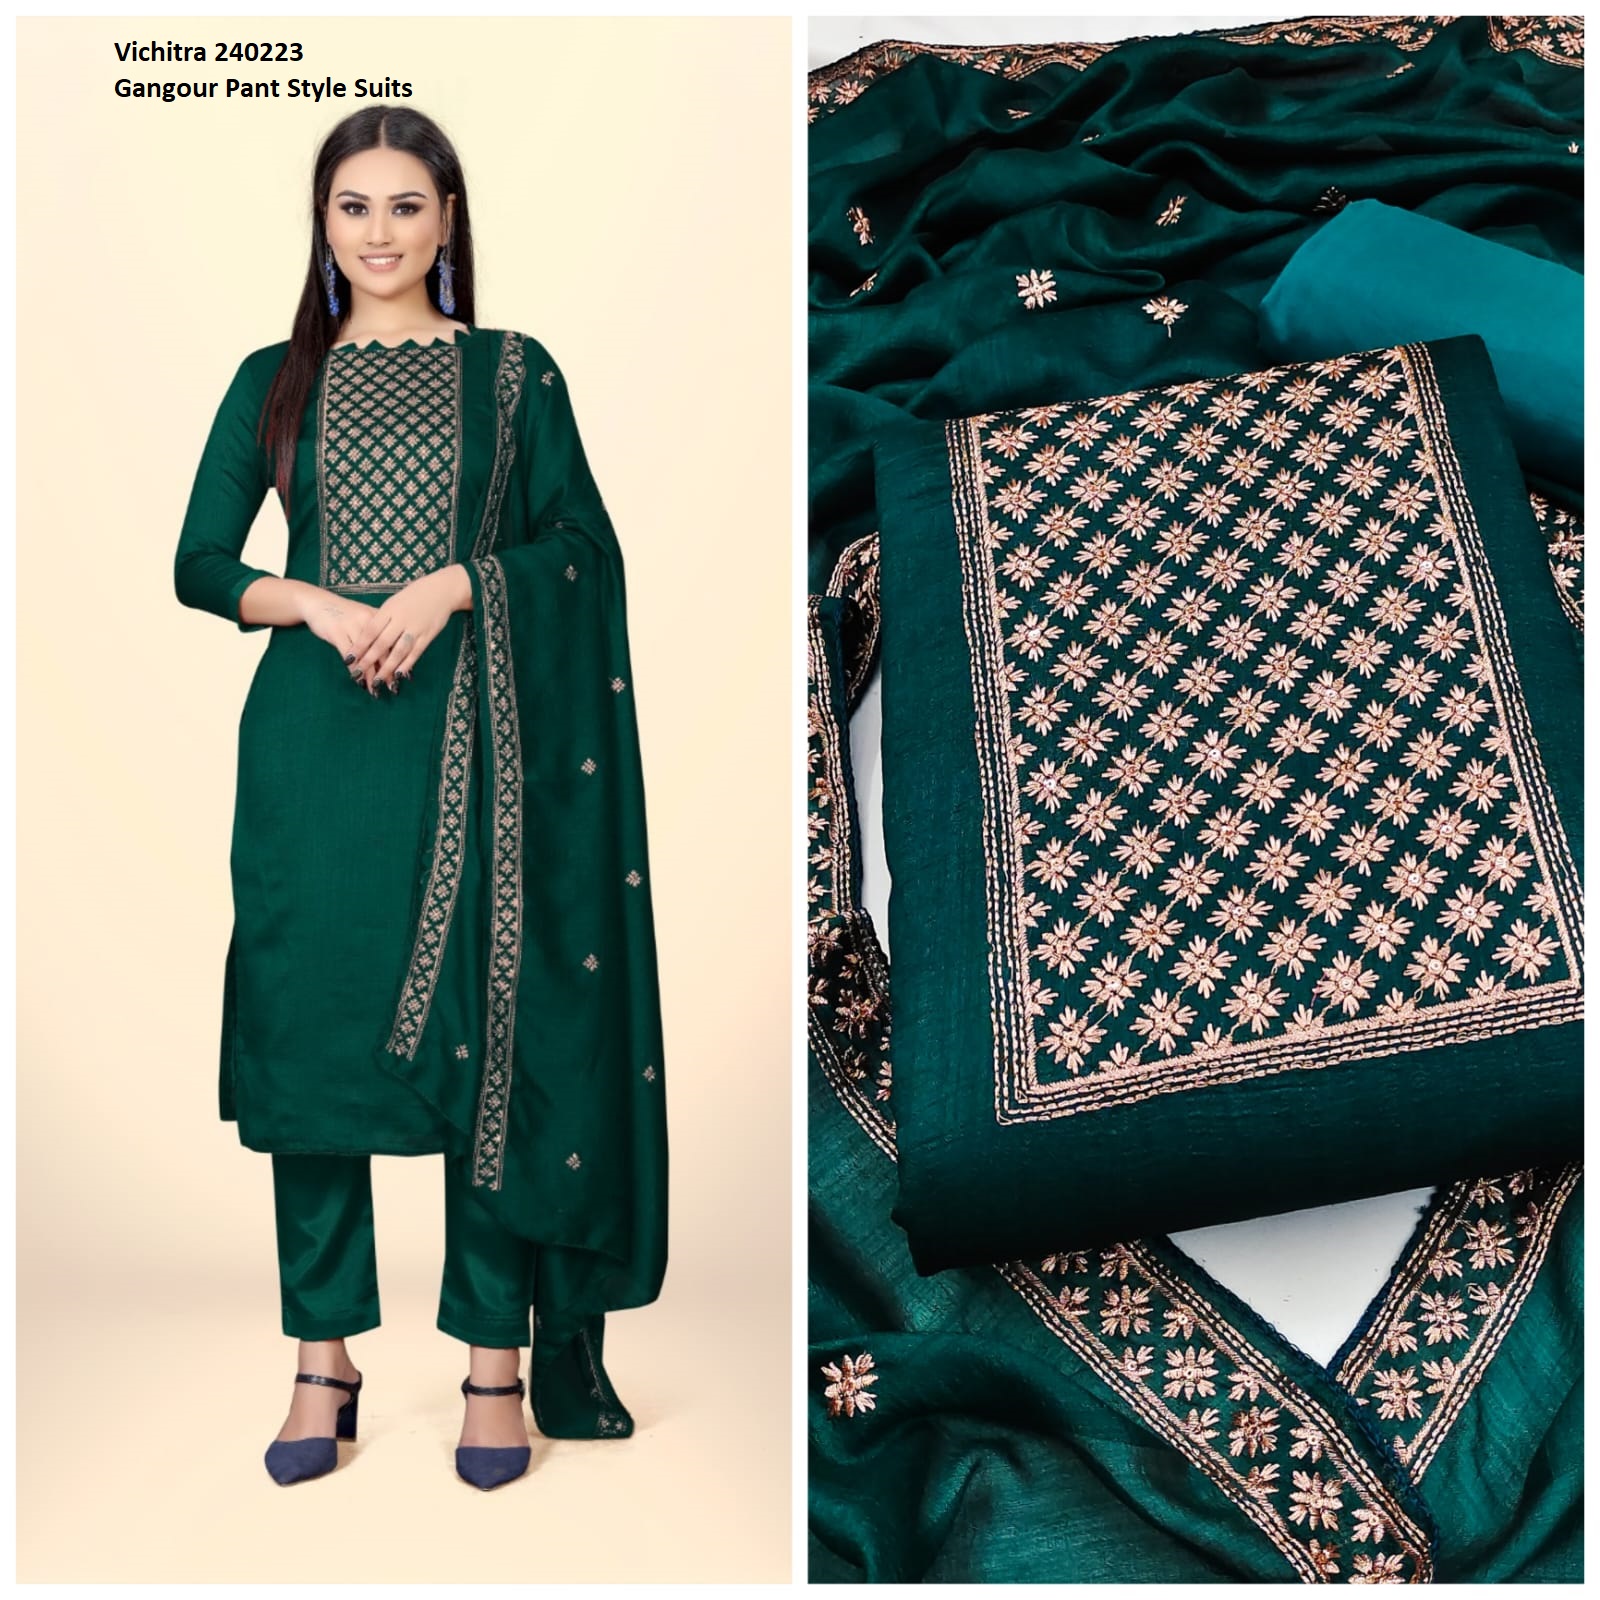 Buy Silk Heavy Work Vichitra 240223 Gangour Pant Style Suits